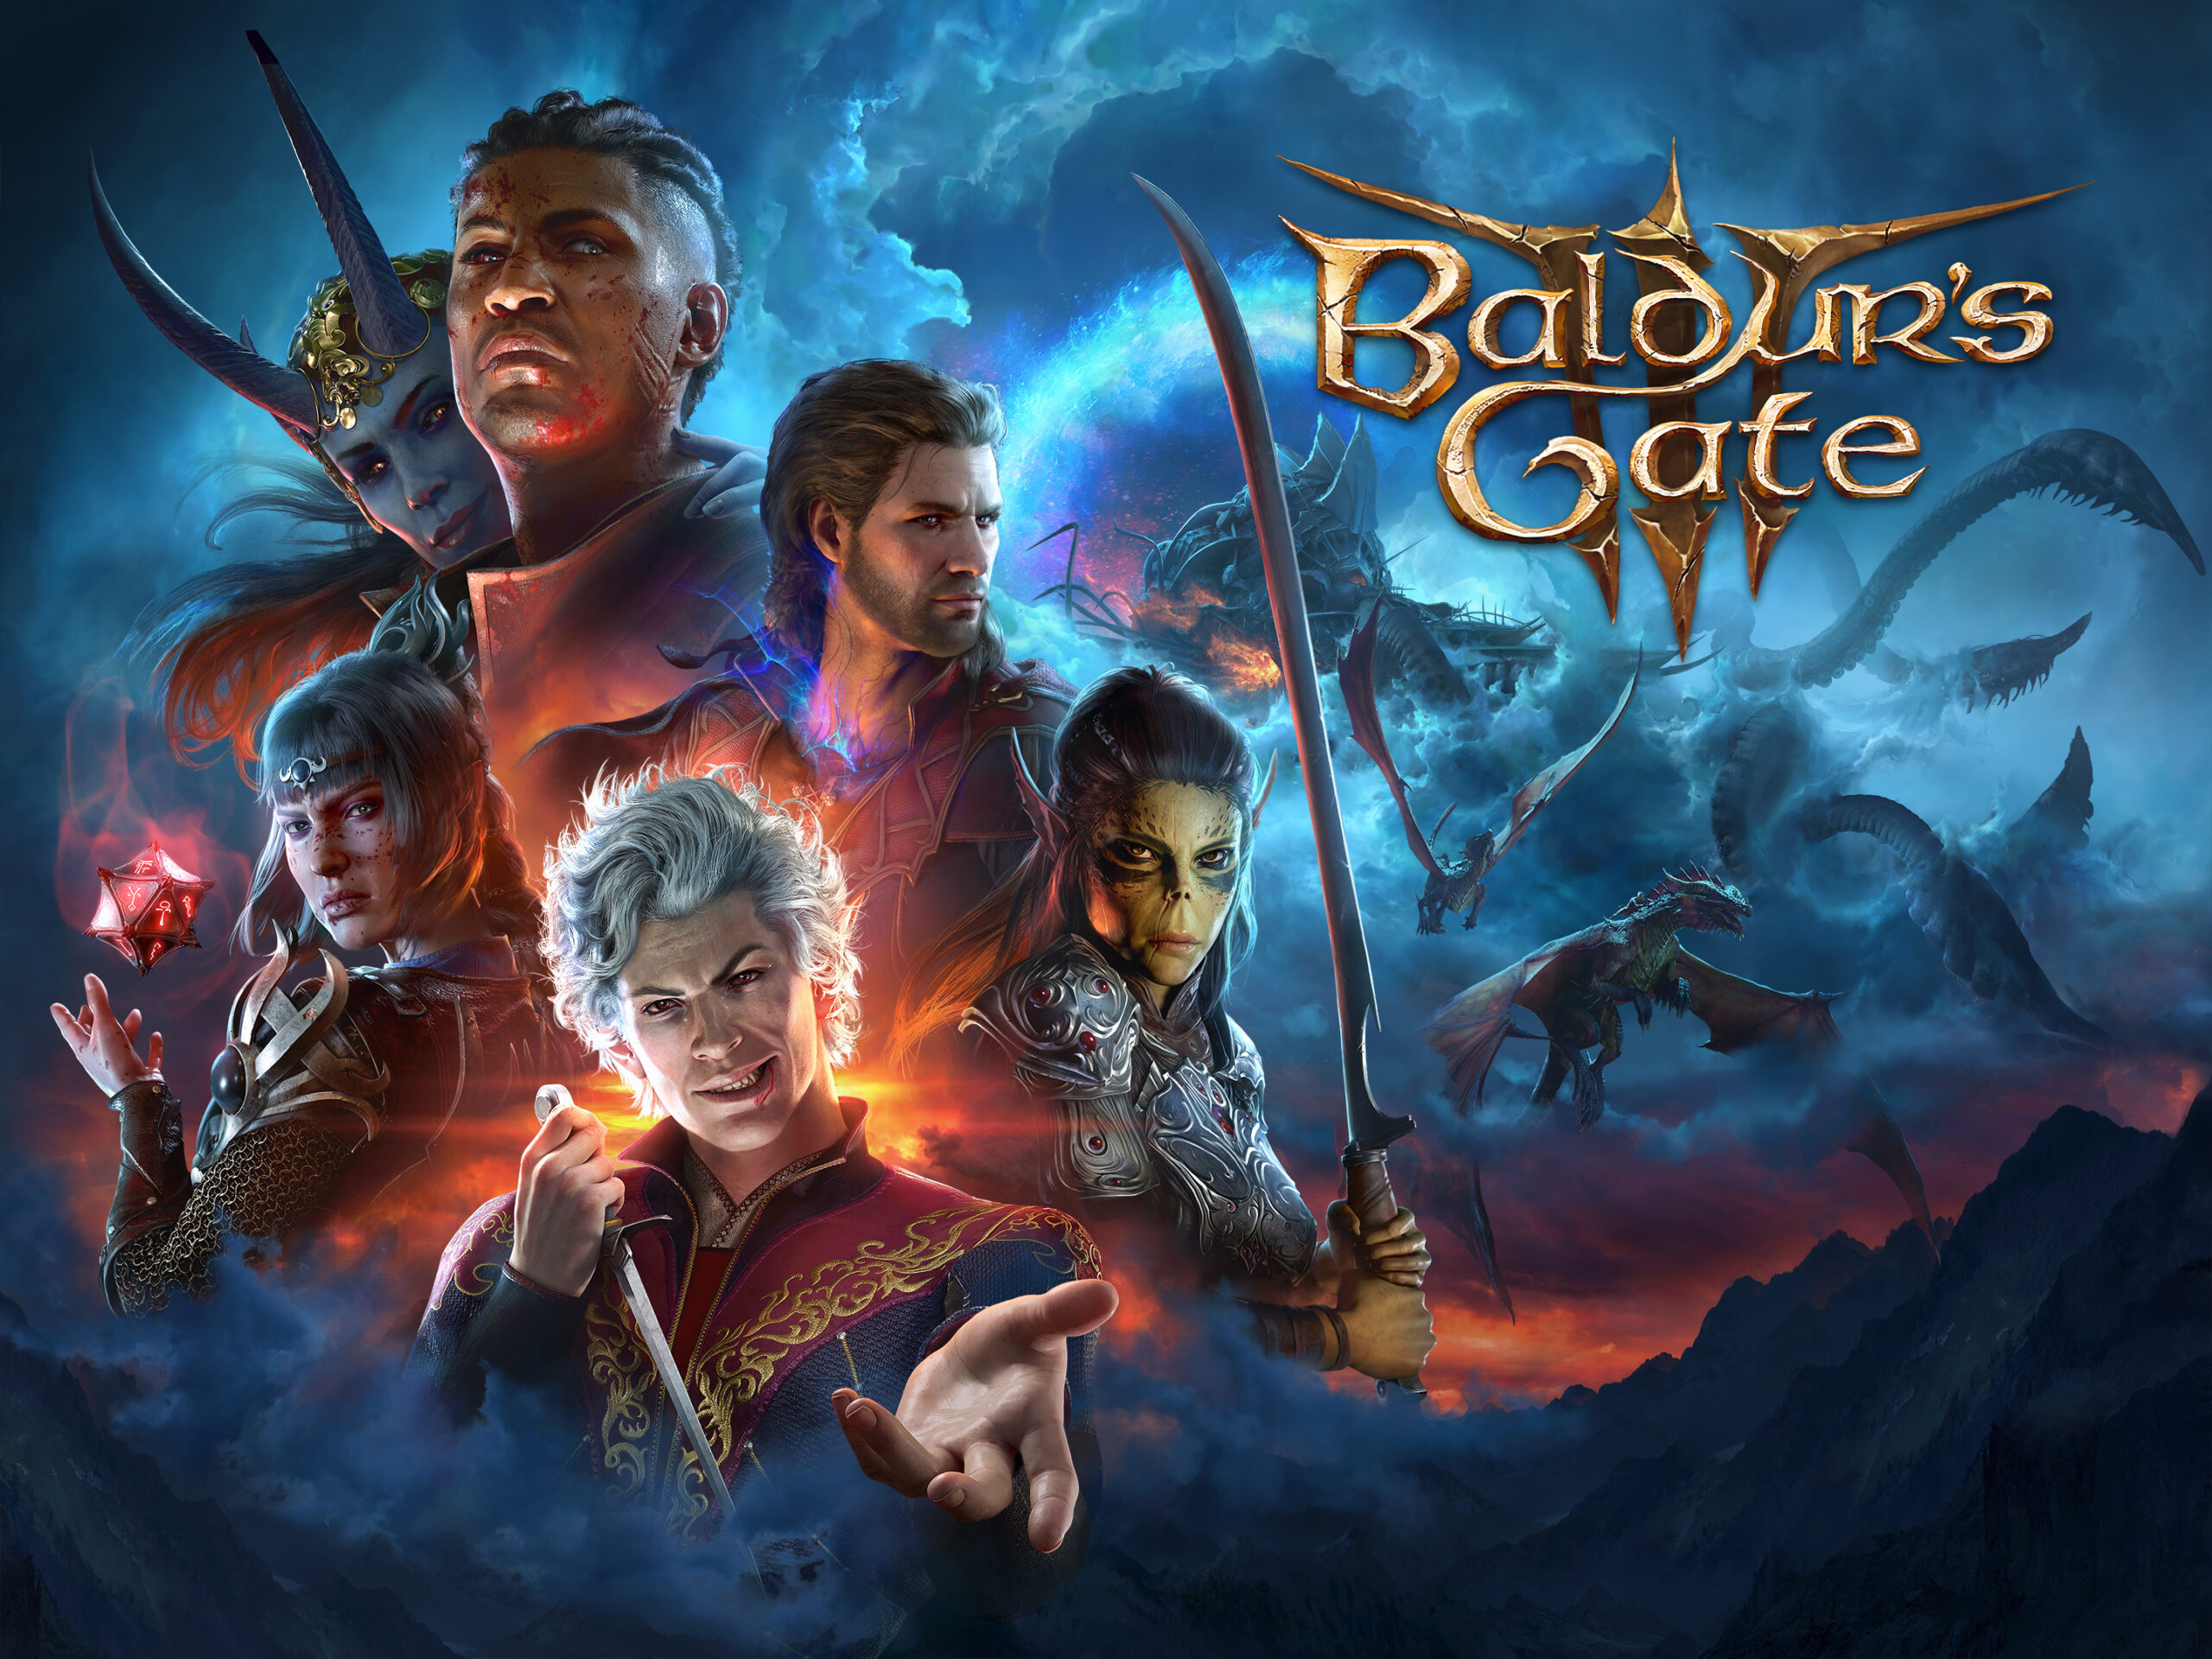 Baldur's Gate 3 tops charts as highest-rated PC game ever on Metacritic,  best overall game ever on OpenCritic